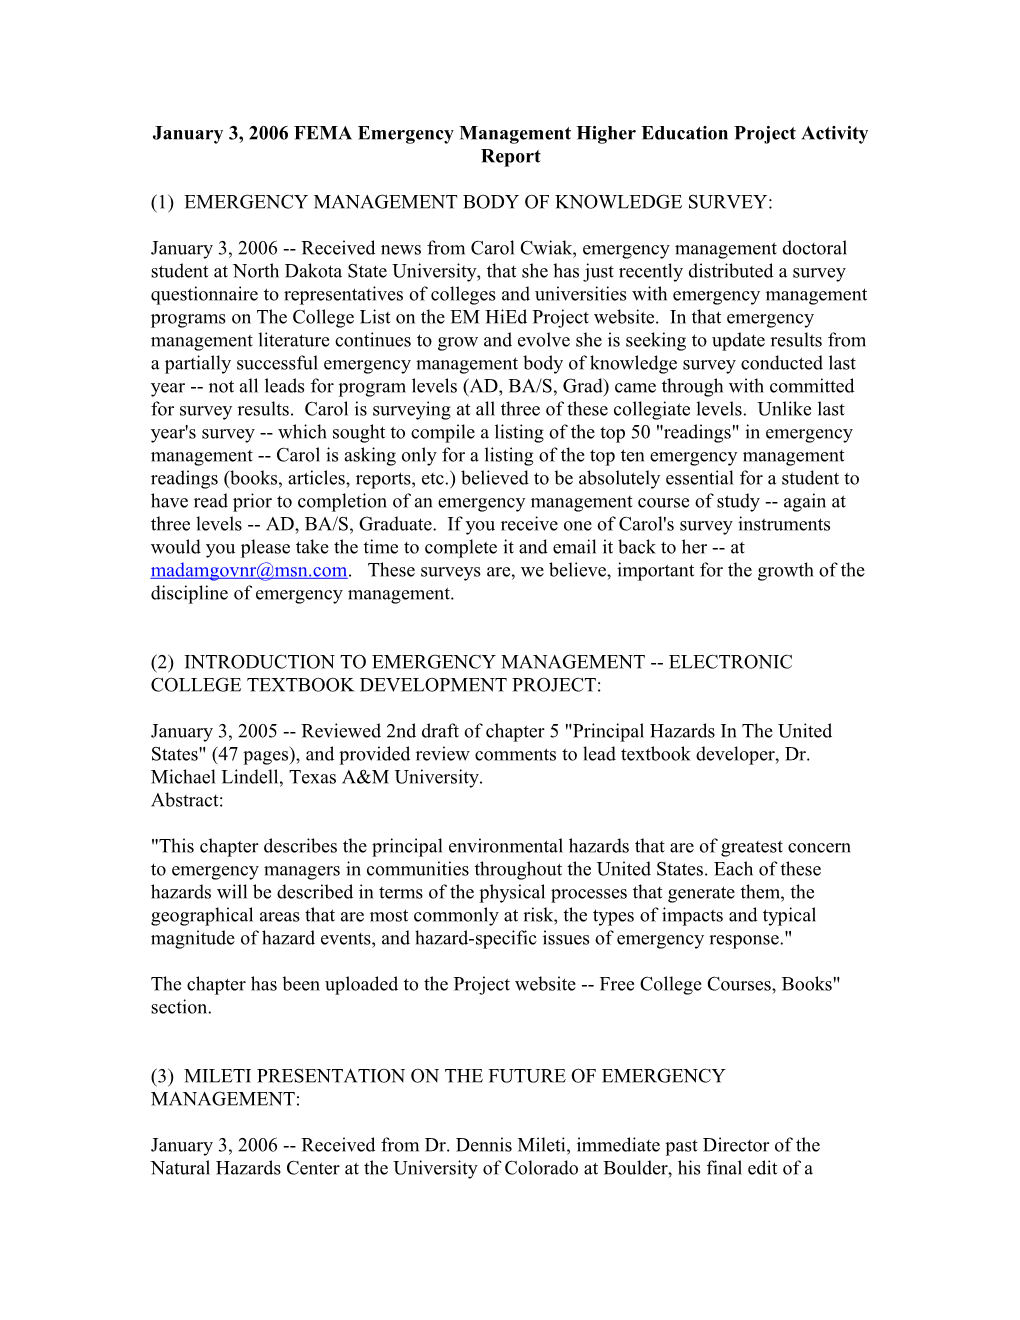 January 3, 2006 FEMA Emergency Management Higher Education Project Activity Report